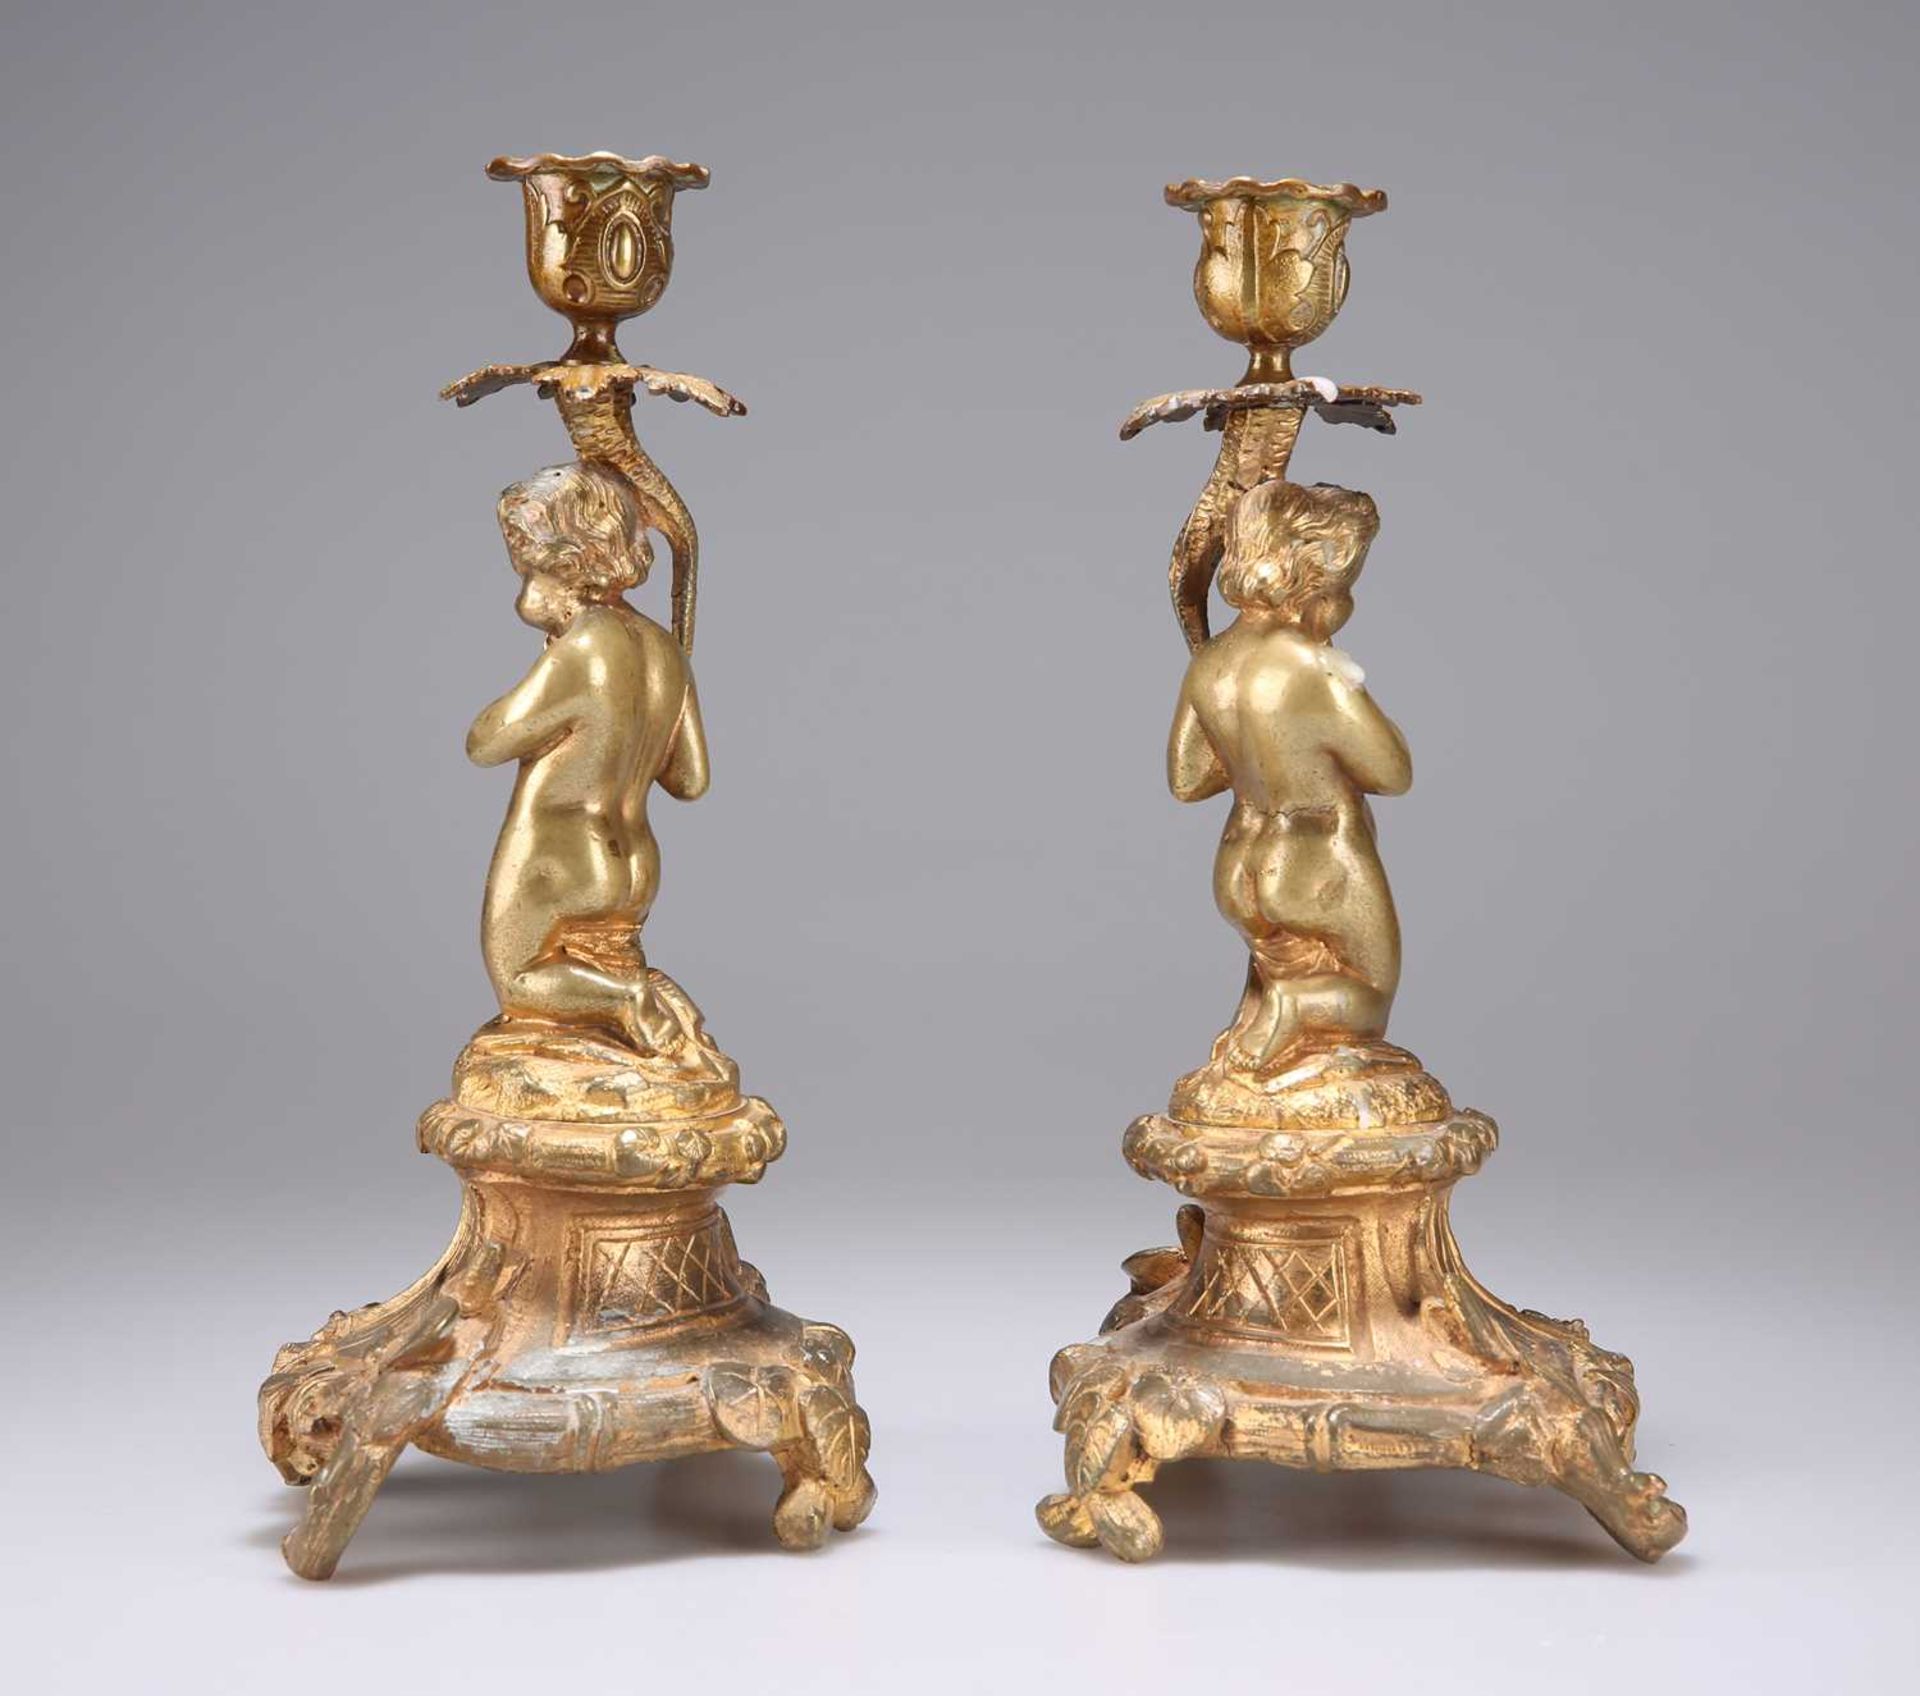 A PAIR OF 19TH CENTURY GILT-BRONZE CANDLESTICKS - Image 2 of 2